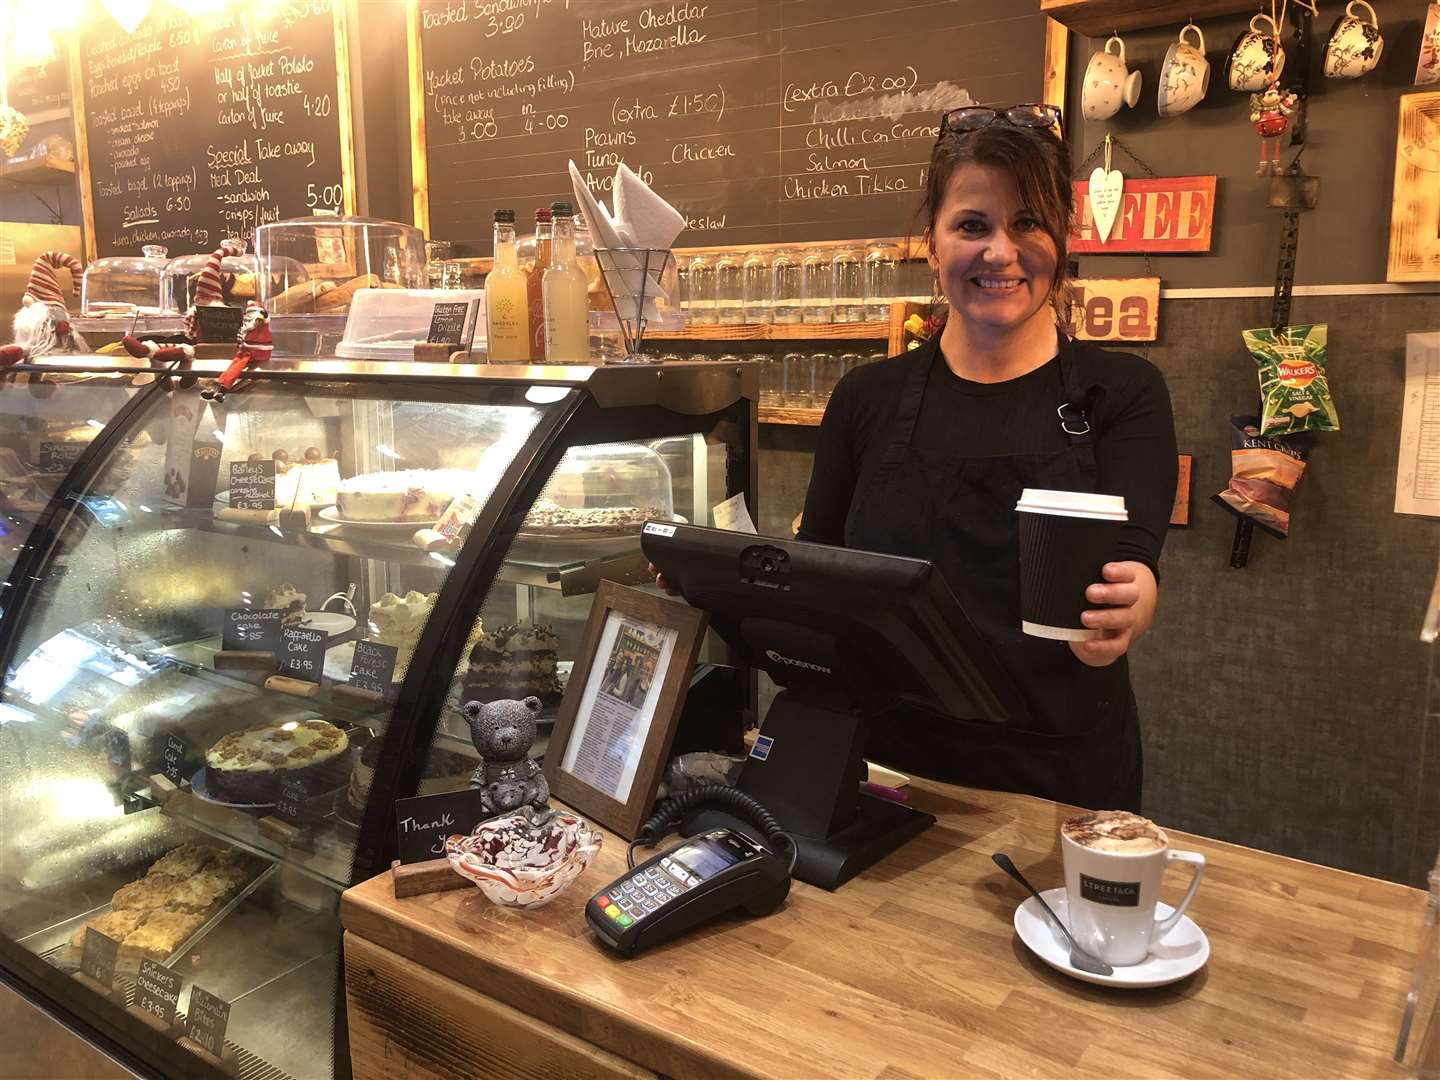 Marta, the owner of Puddings, introduced the hot drink scheme this month